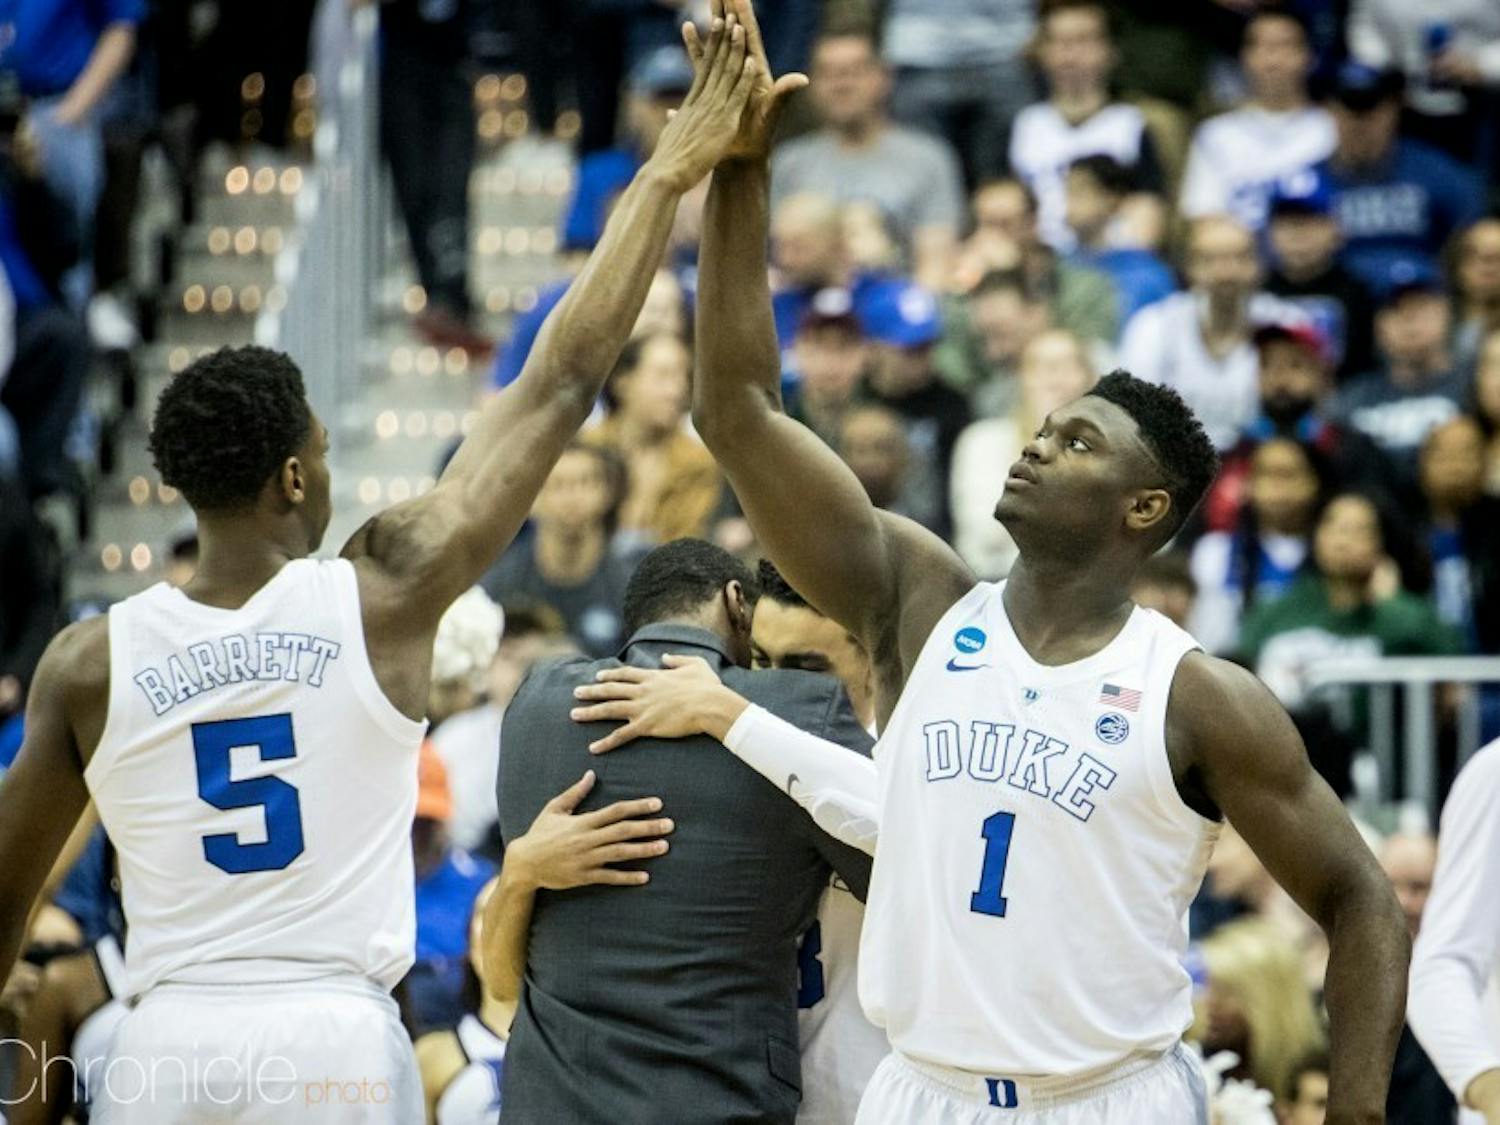 Zion Williamson and RJ Barrett have performed exceptionally well in December so far.